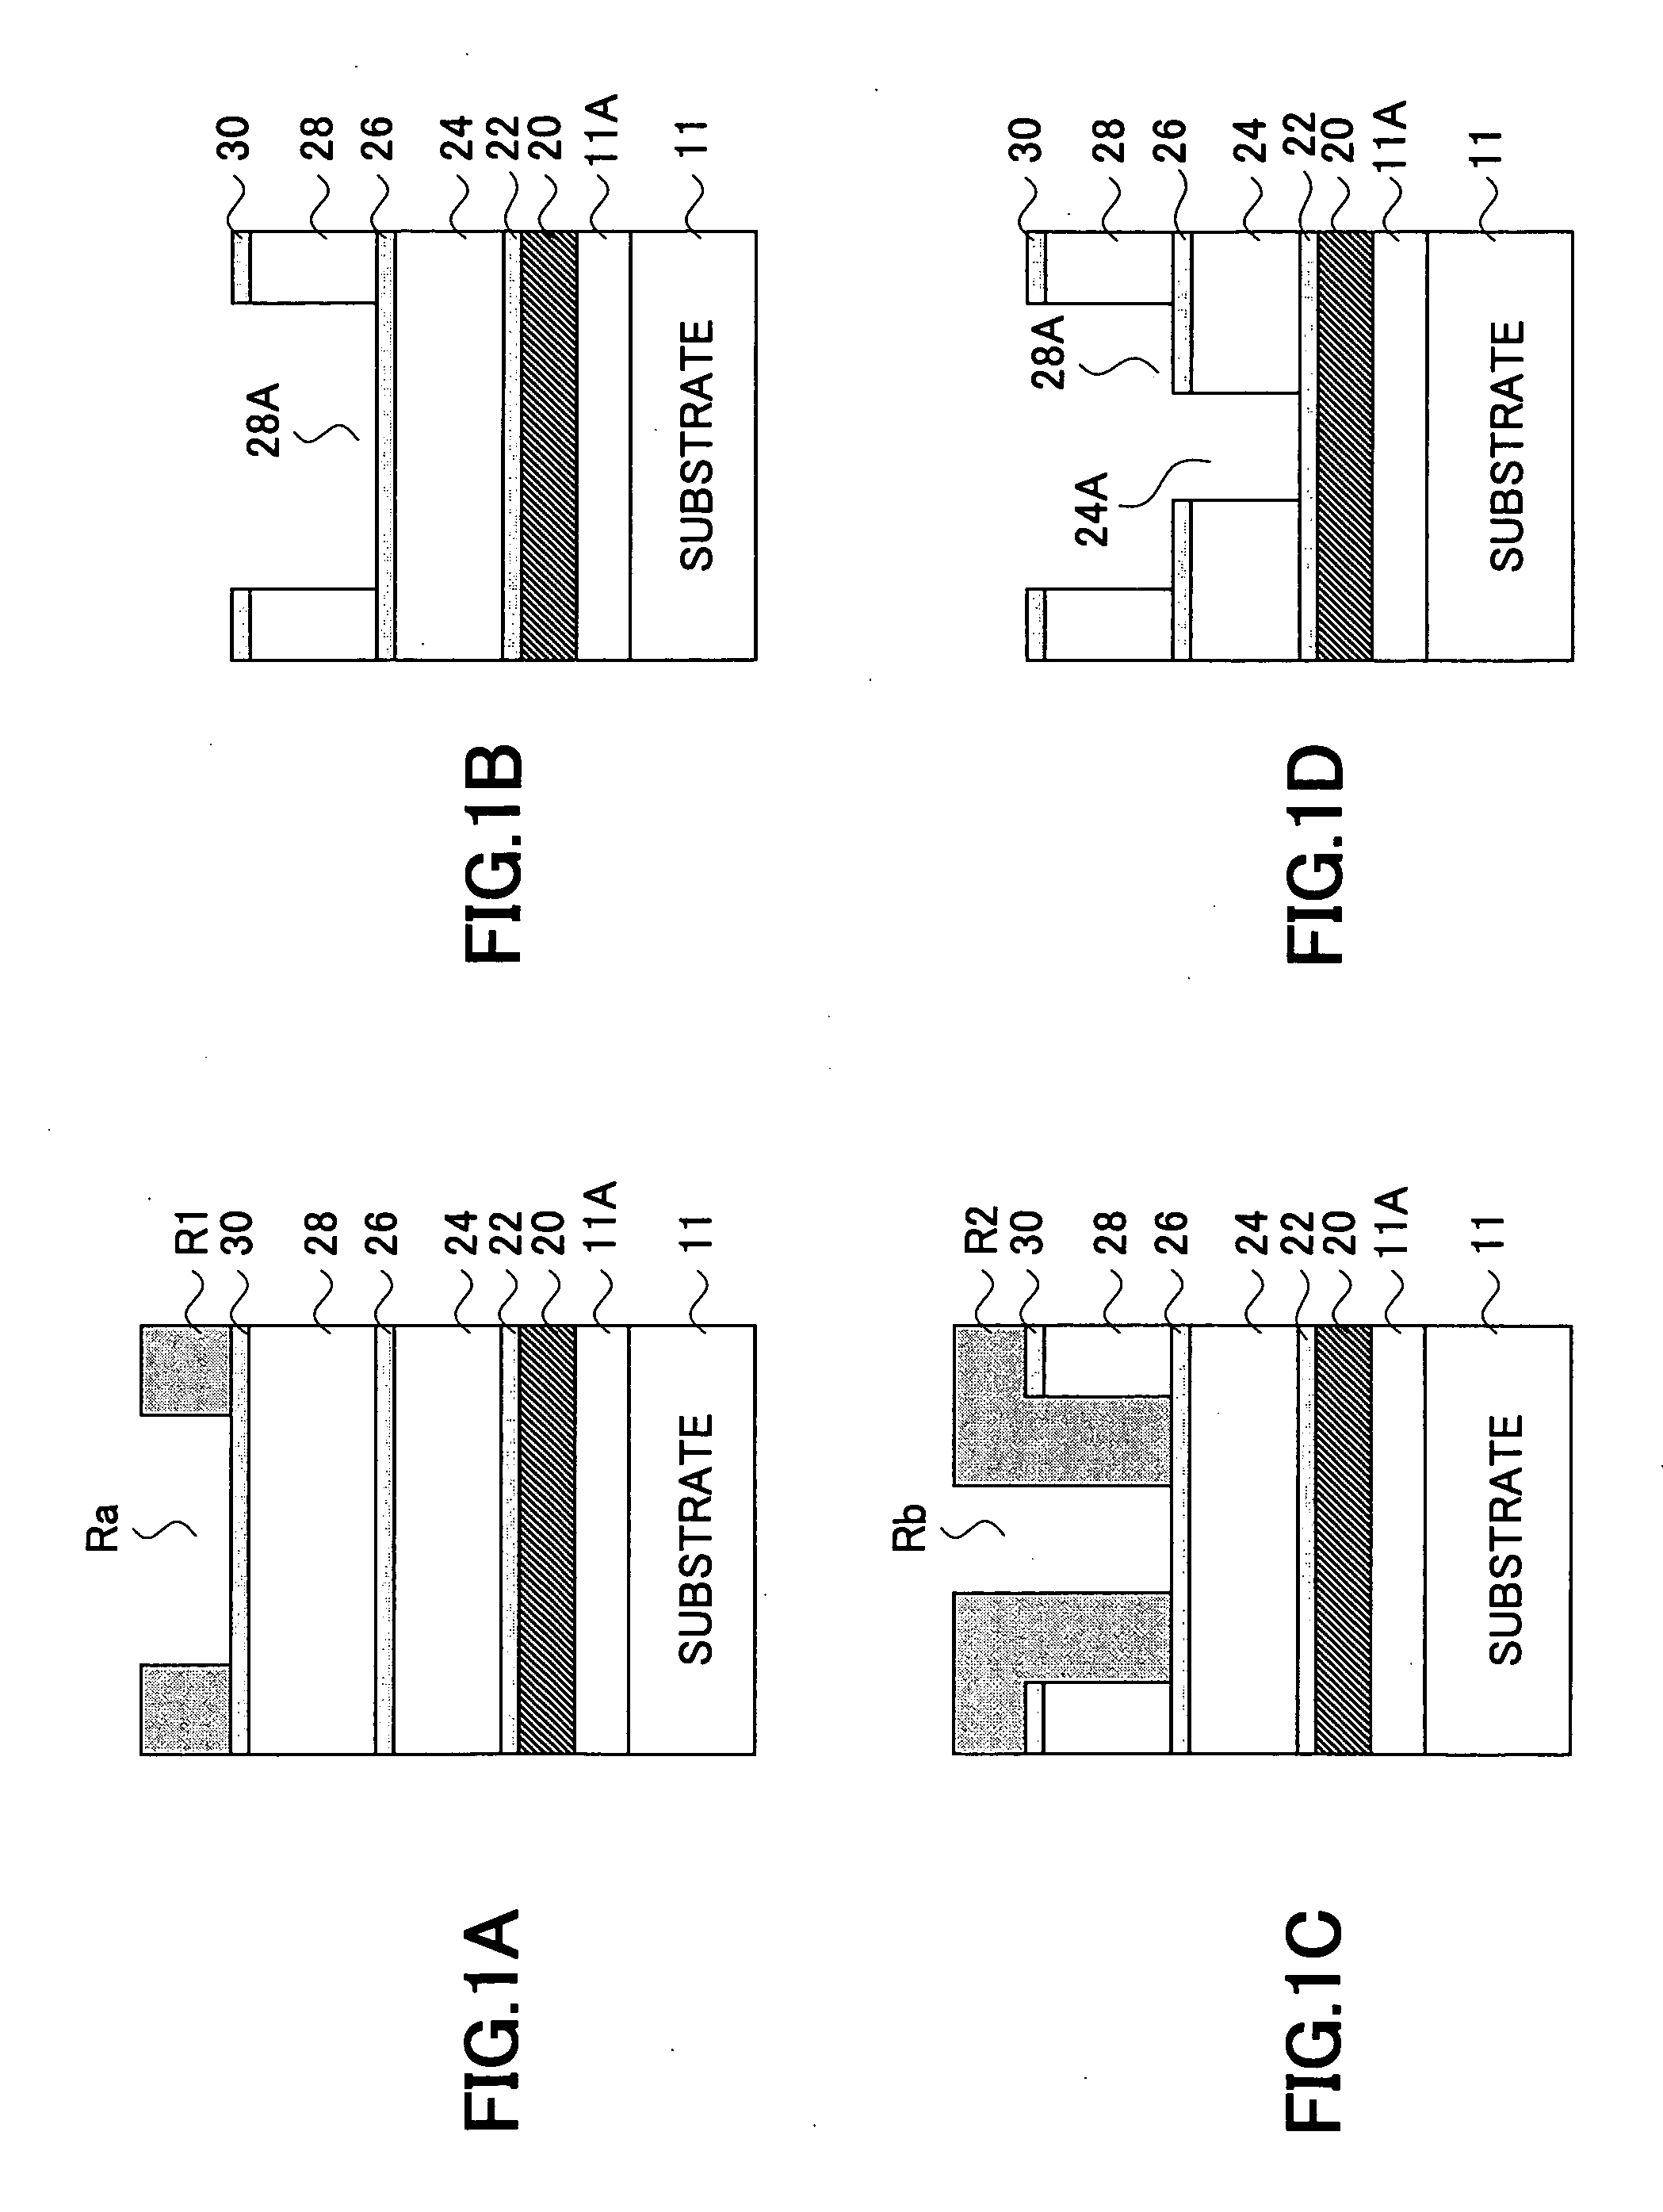 Semiconductor device having a multilayer interconnection structure and fabrication method